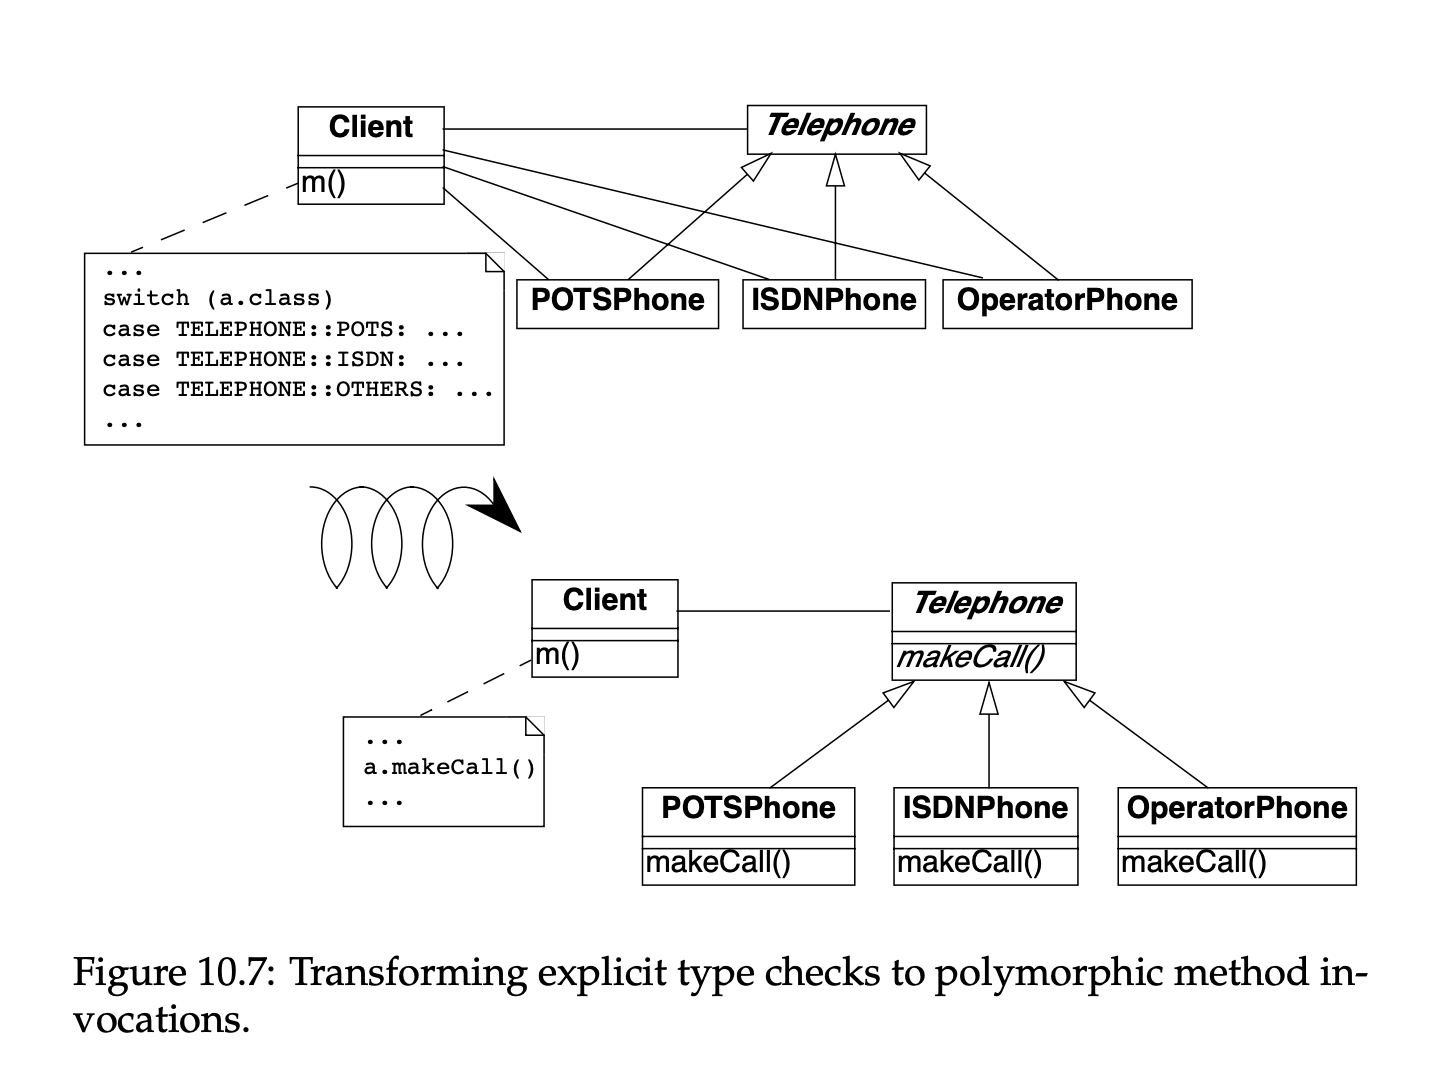 Figure 10.7: Transforming explicit type checks to polymorphic method invocations.